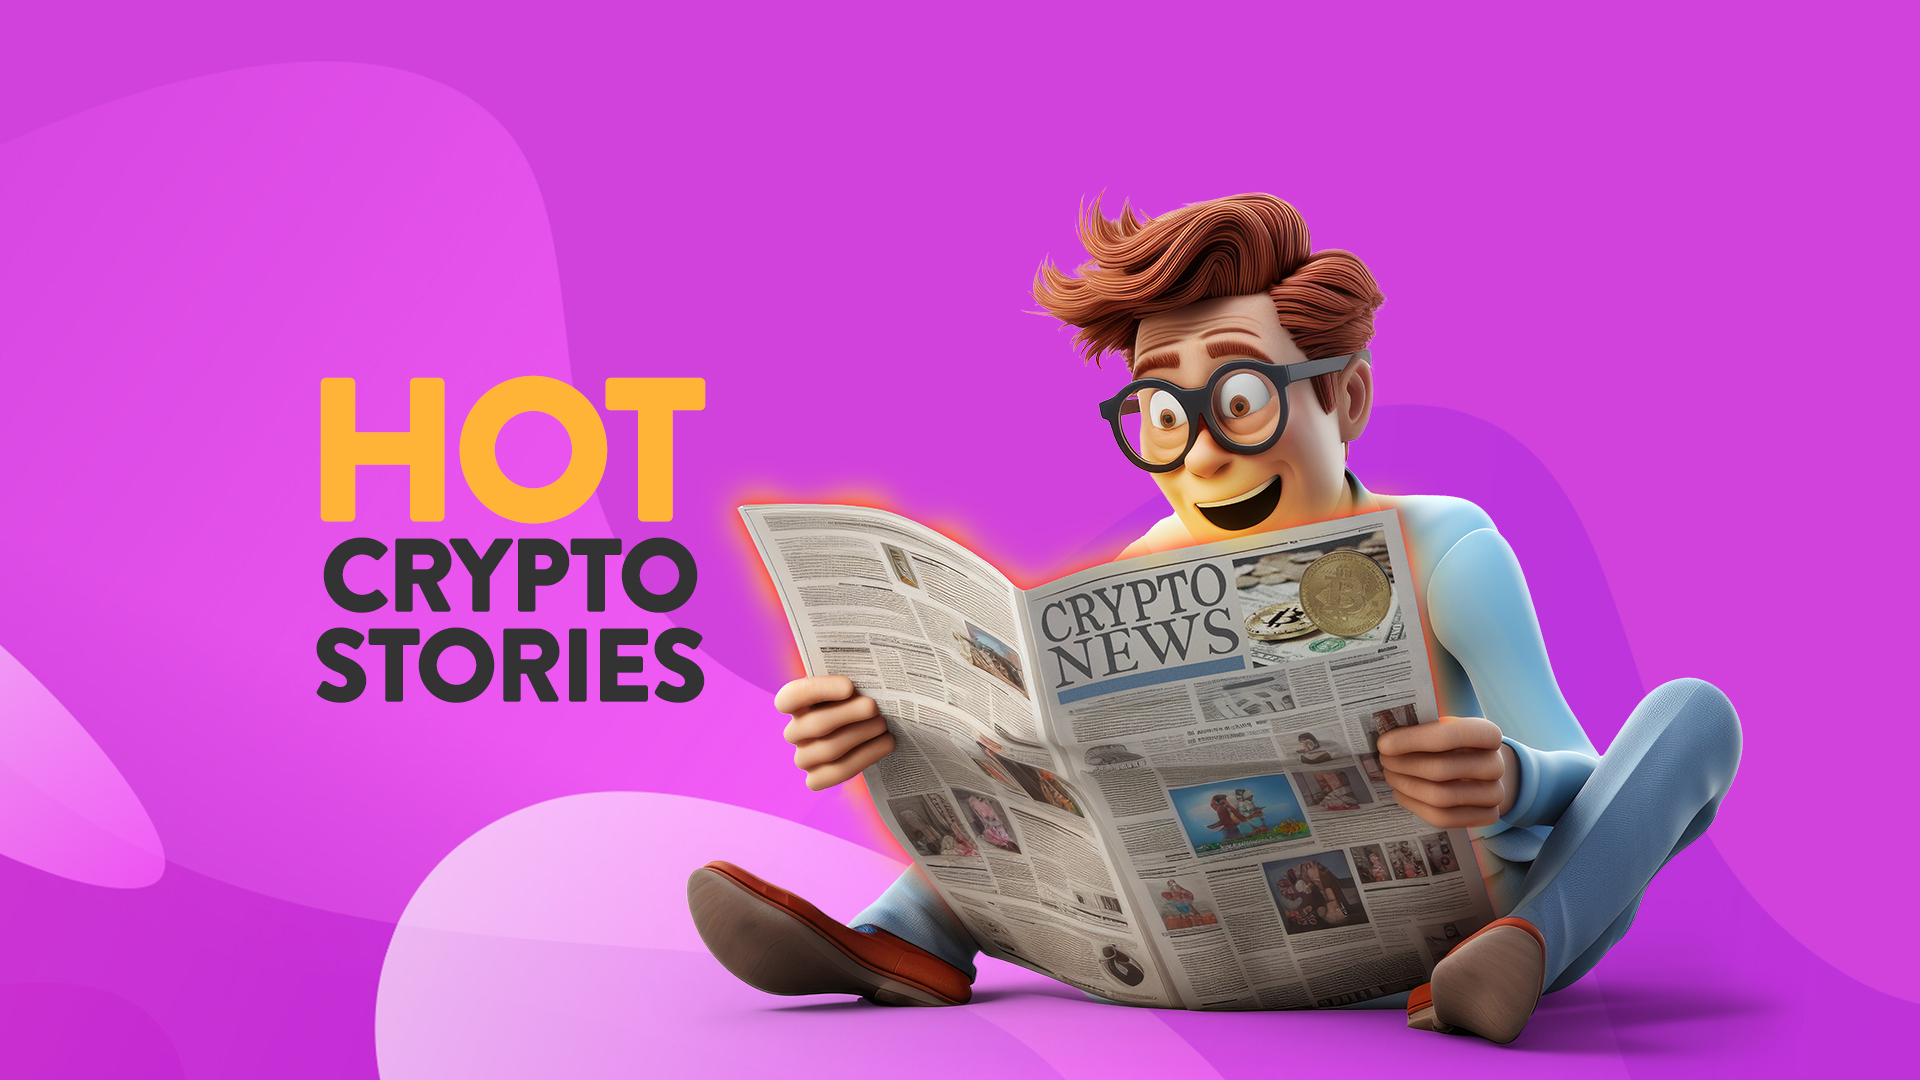 A cartoon man is sitting down reading a newspaper titled ‘Crypto News’, and to his left is ‘Hot Crypto Stories’, and all is on a purple background.